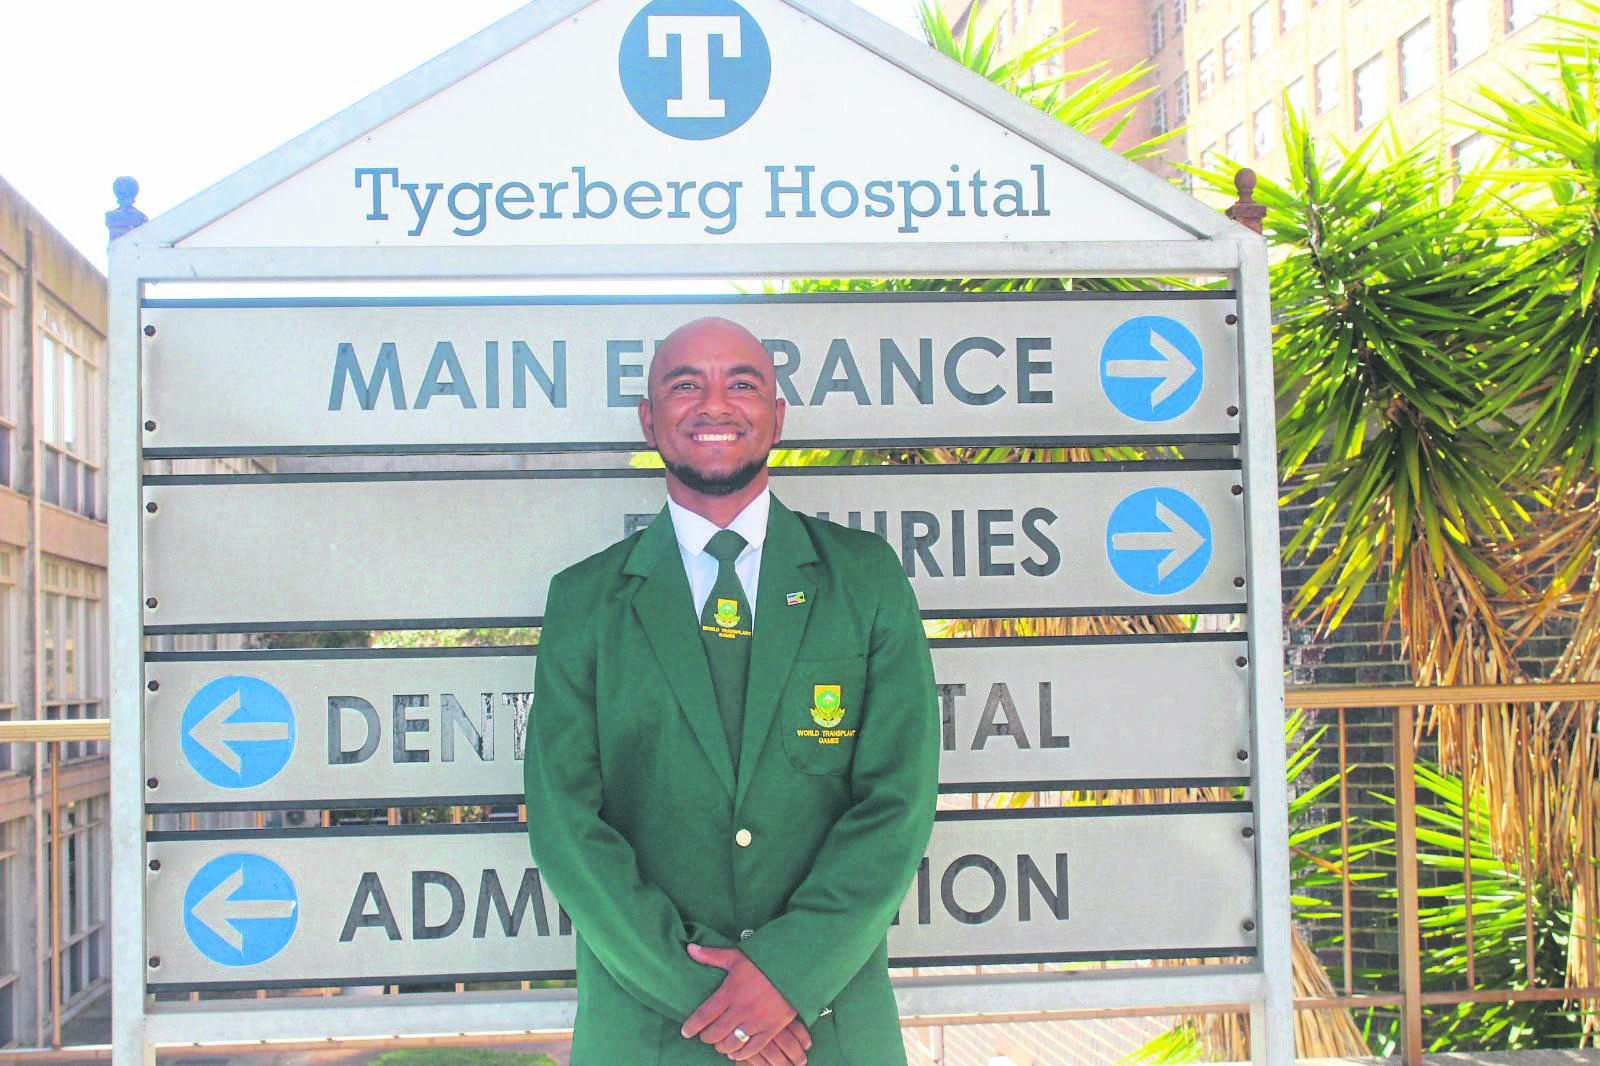 Bradley Arendse (39) from Malmesbury was set to compete in the World Transplant Games but plans fell through due to visa issues.. 